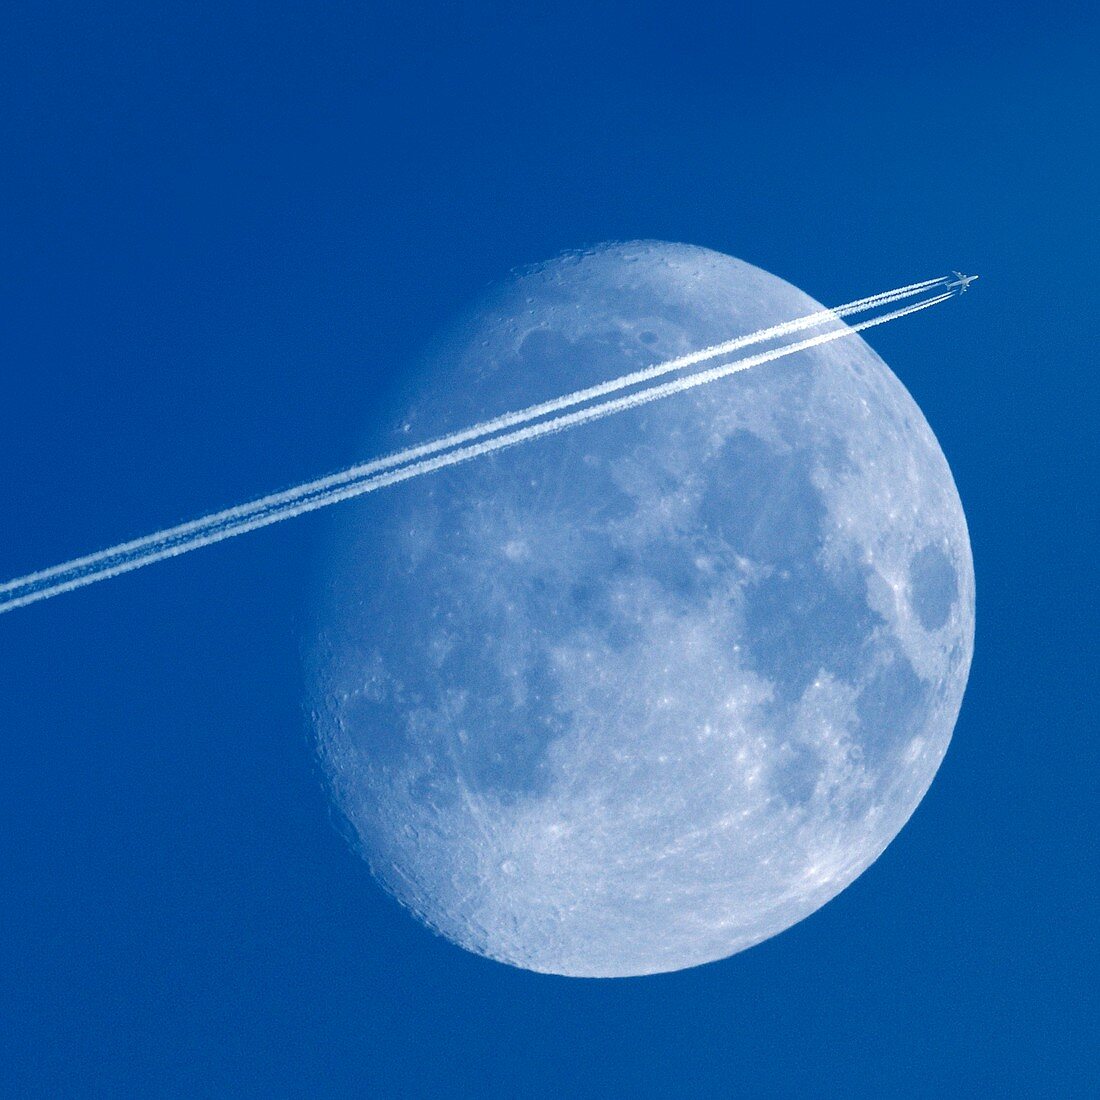 Moon and aeroplane contrails